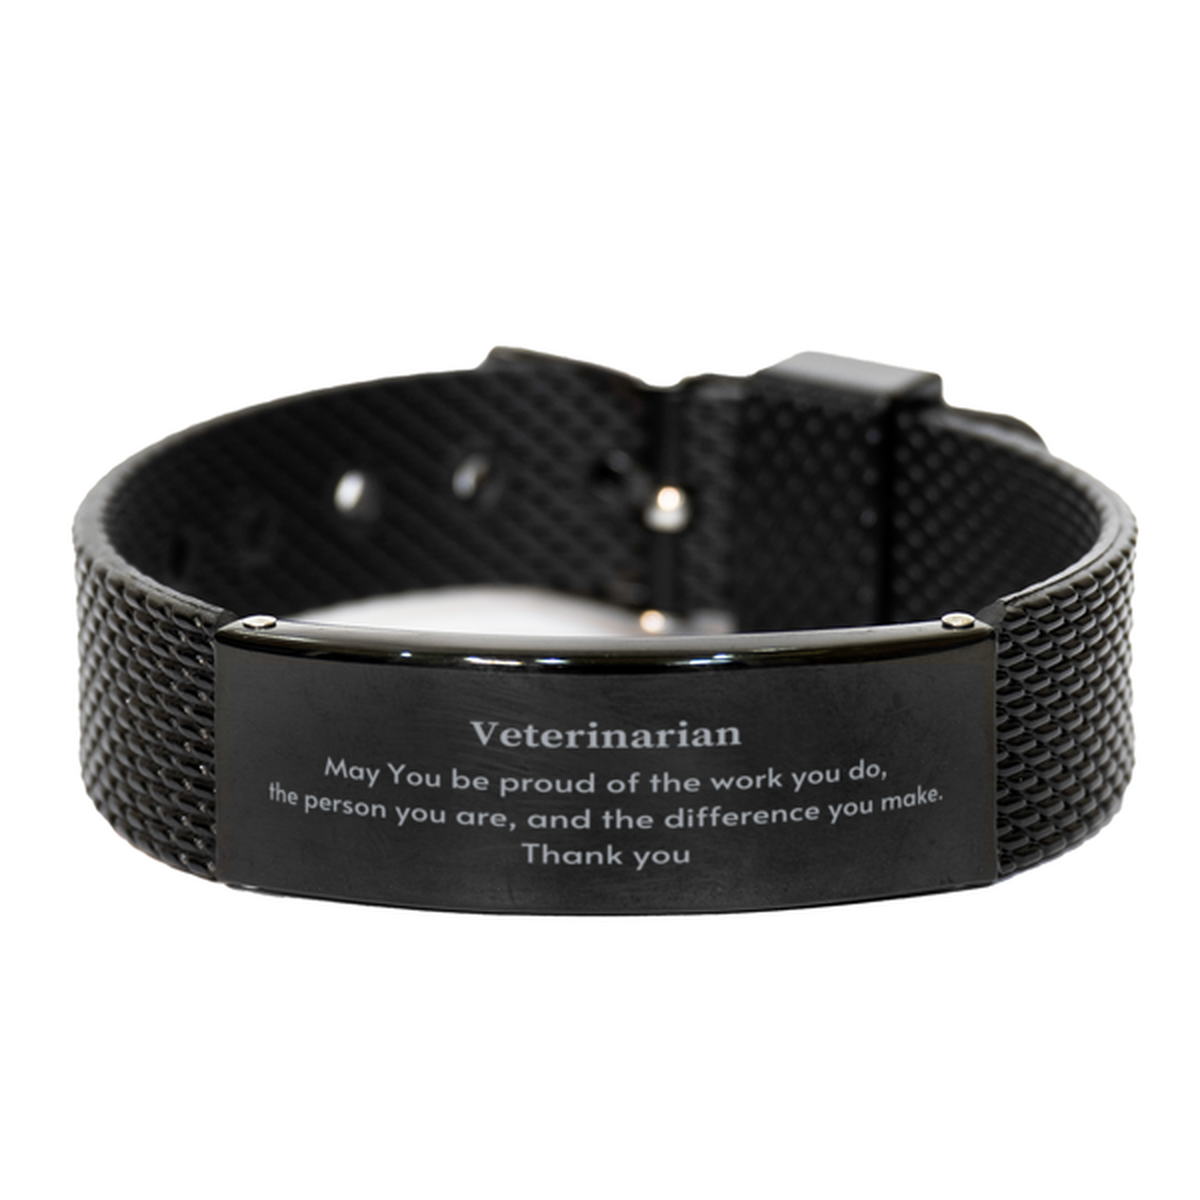 Heartwarming Black Shark Mesh Bracelet Retirement Coworkers Gifts for Veterinarian, Veterinarian May You be proud of the work you do, the person you are Gifts for Boss Men Women Friends